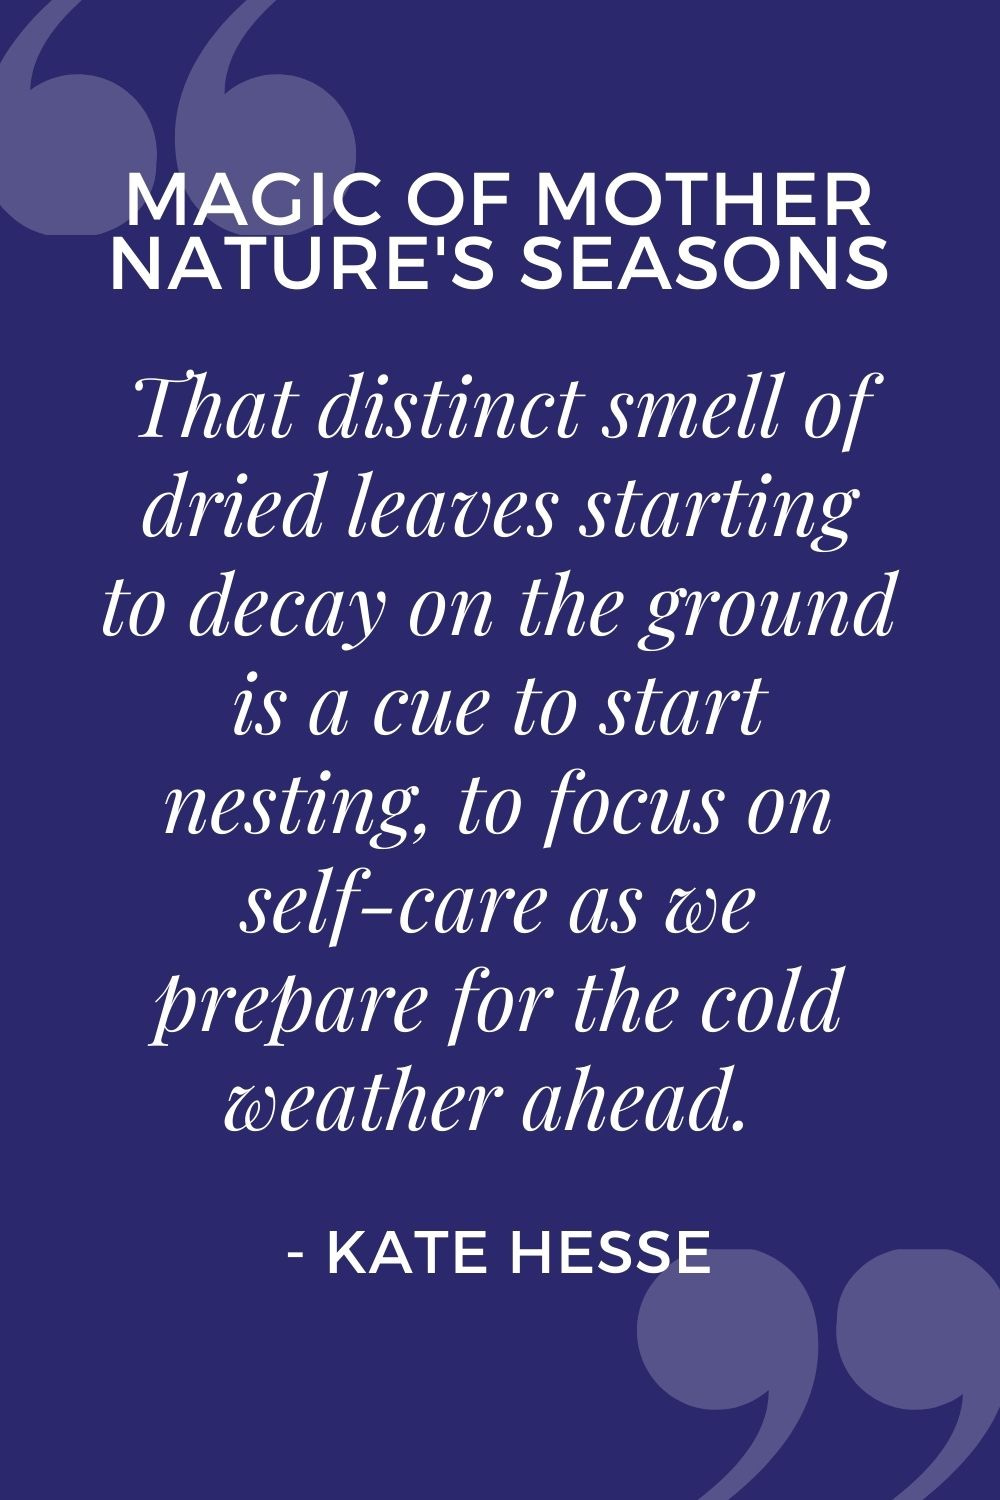 That distinct smell of dried leaves starting to decay on the ground is a cue to start nesting, to focus on self-care as we prepare for the cold weather ahead.